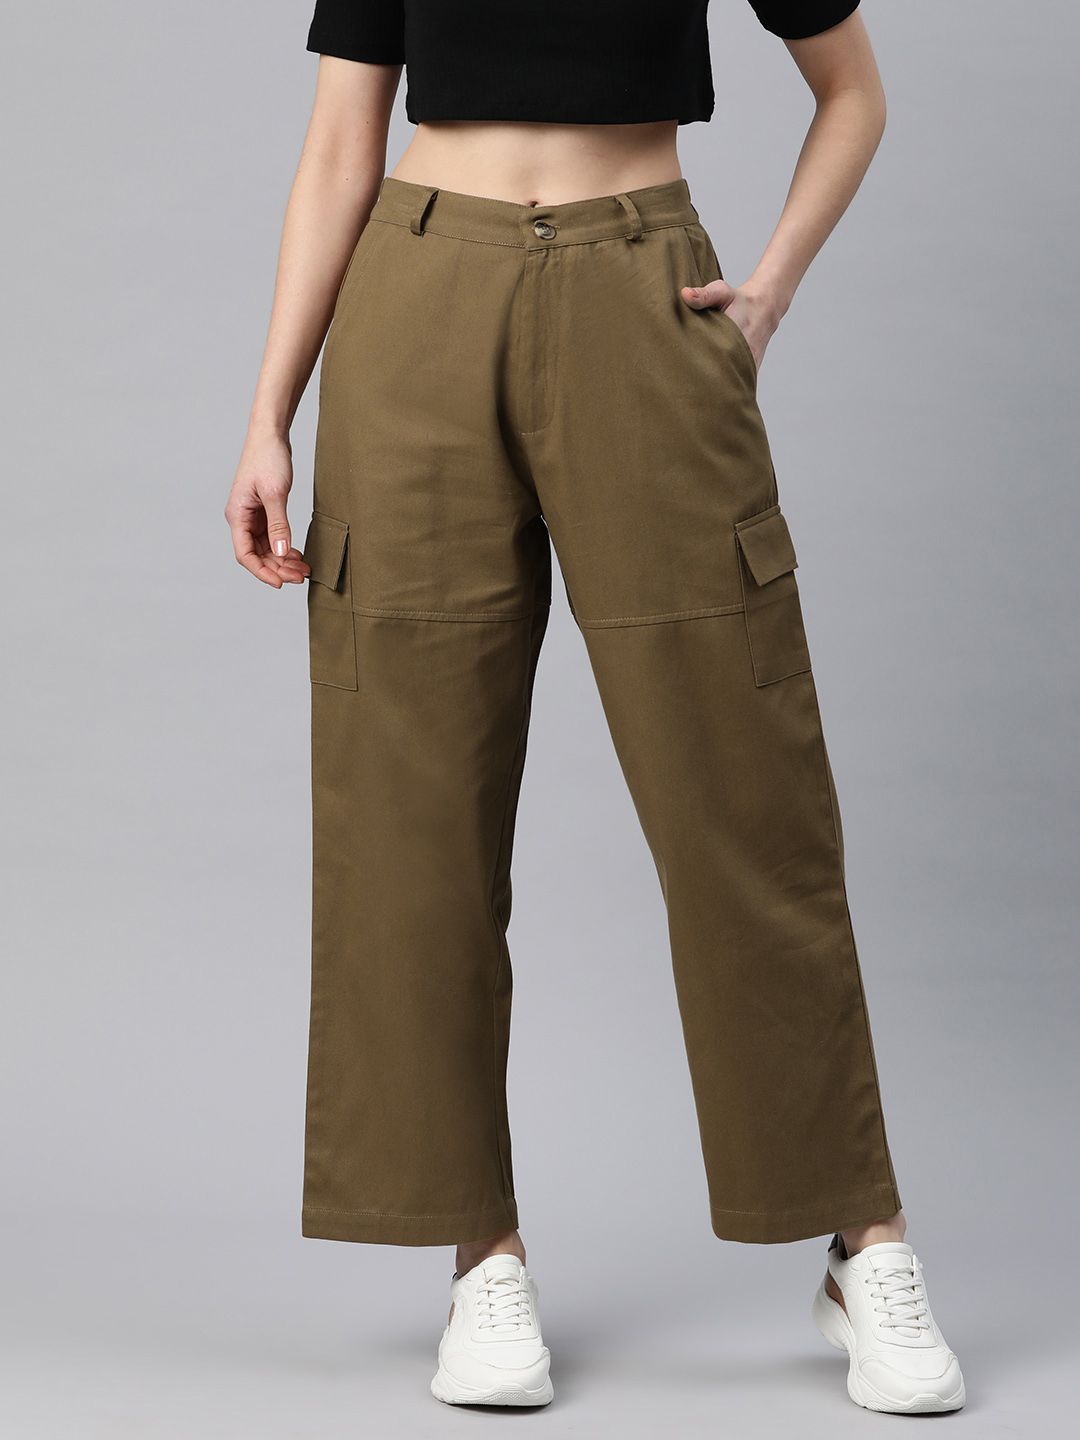 Popnetic Flat-Front High-Rise Pure Cotton Cargos Price in India